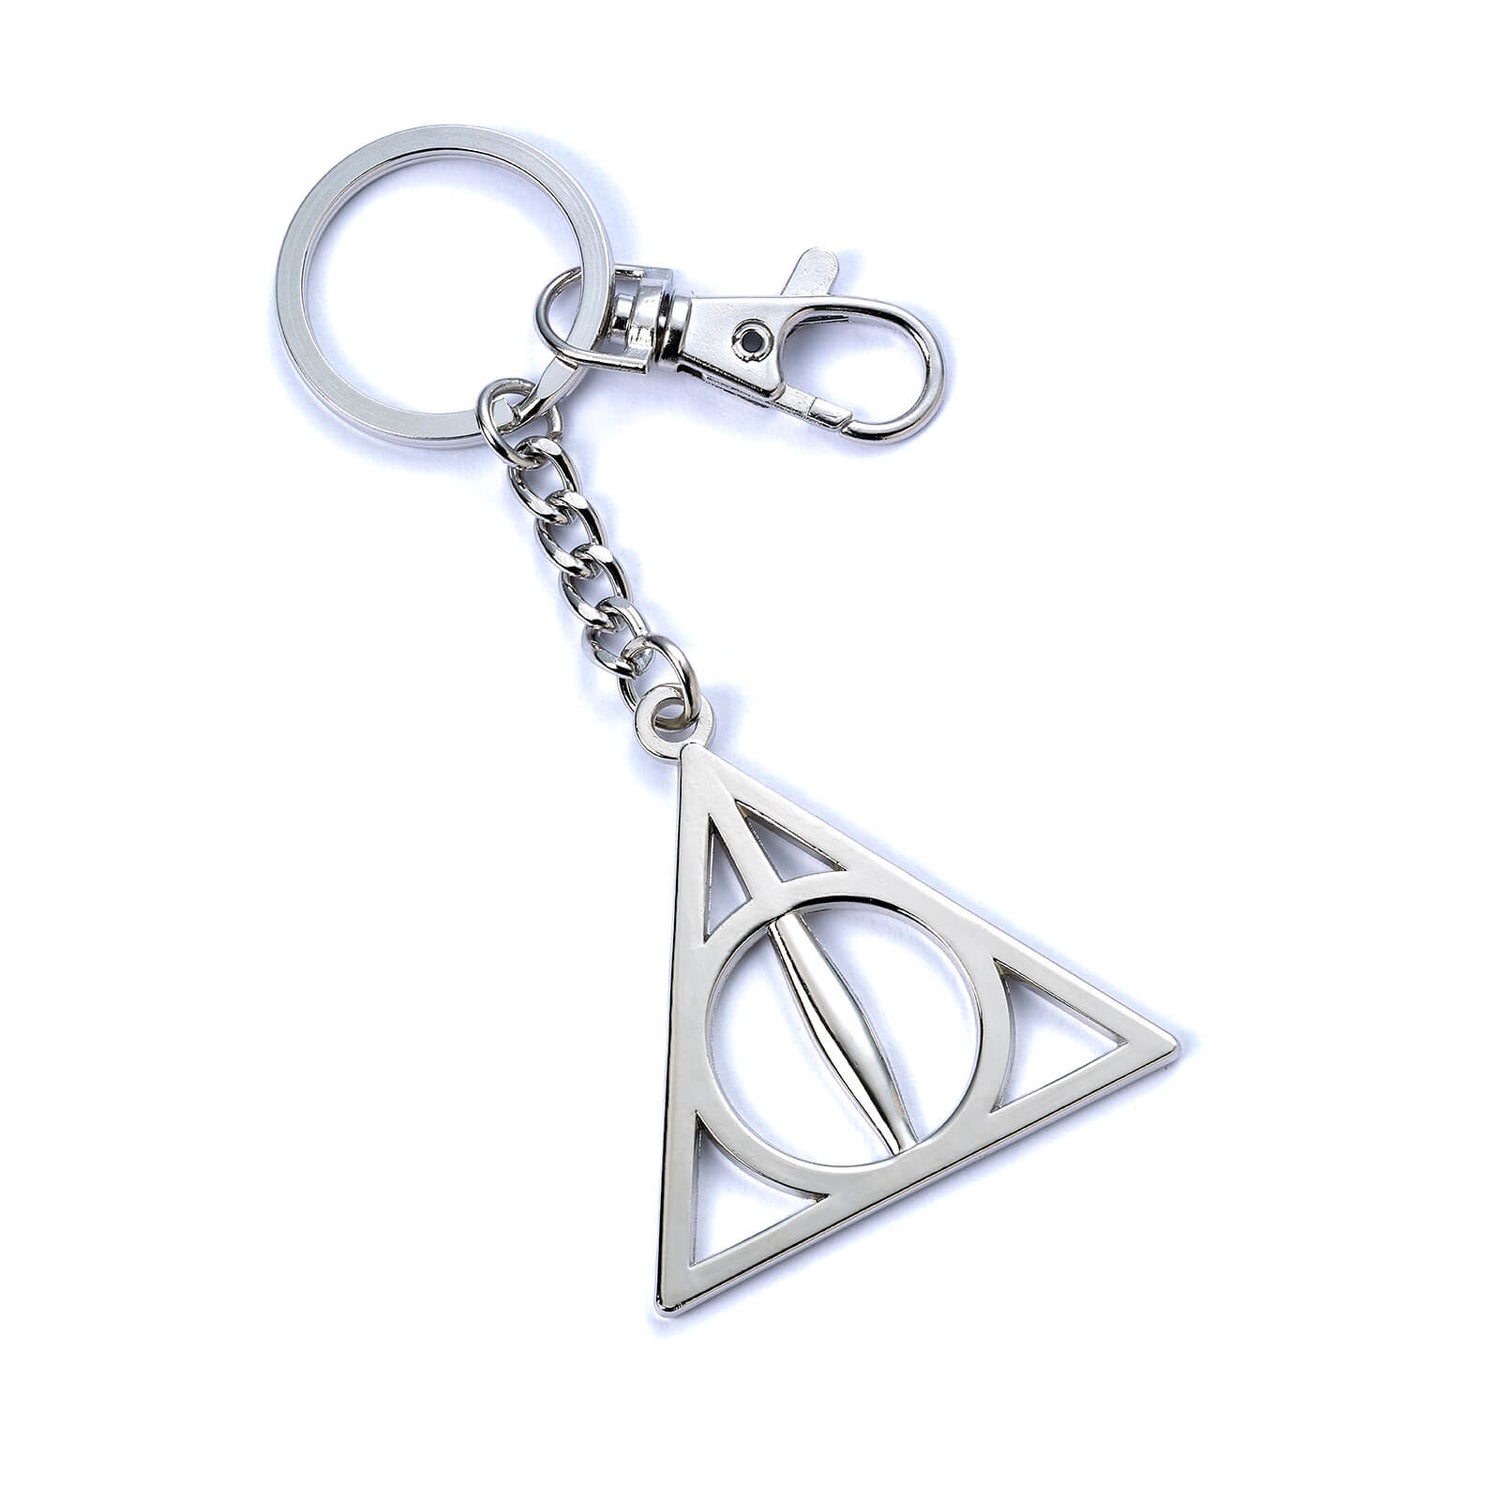 Harry Potter Deathly Hallows Keyring - Silver